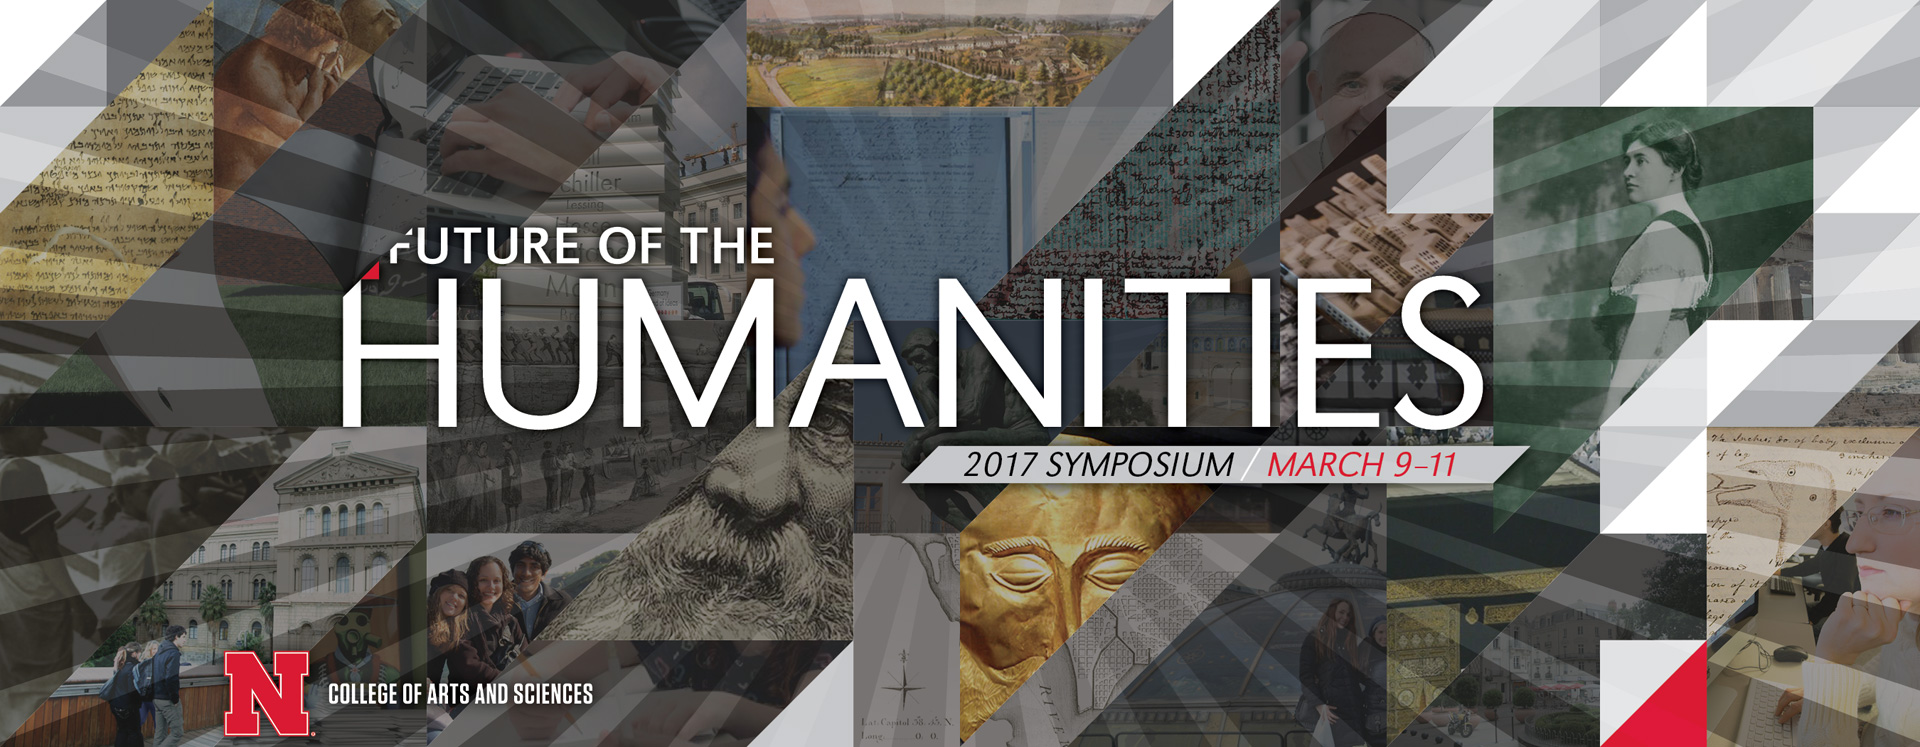 CLRS Faculty to Participate in Future of the Humanities Symposium